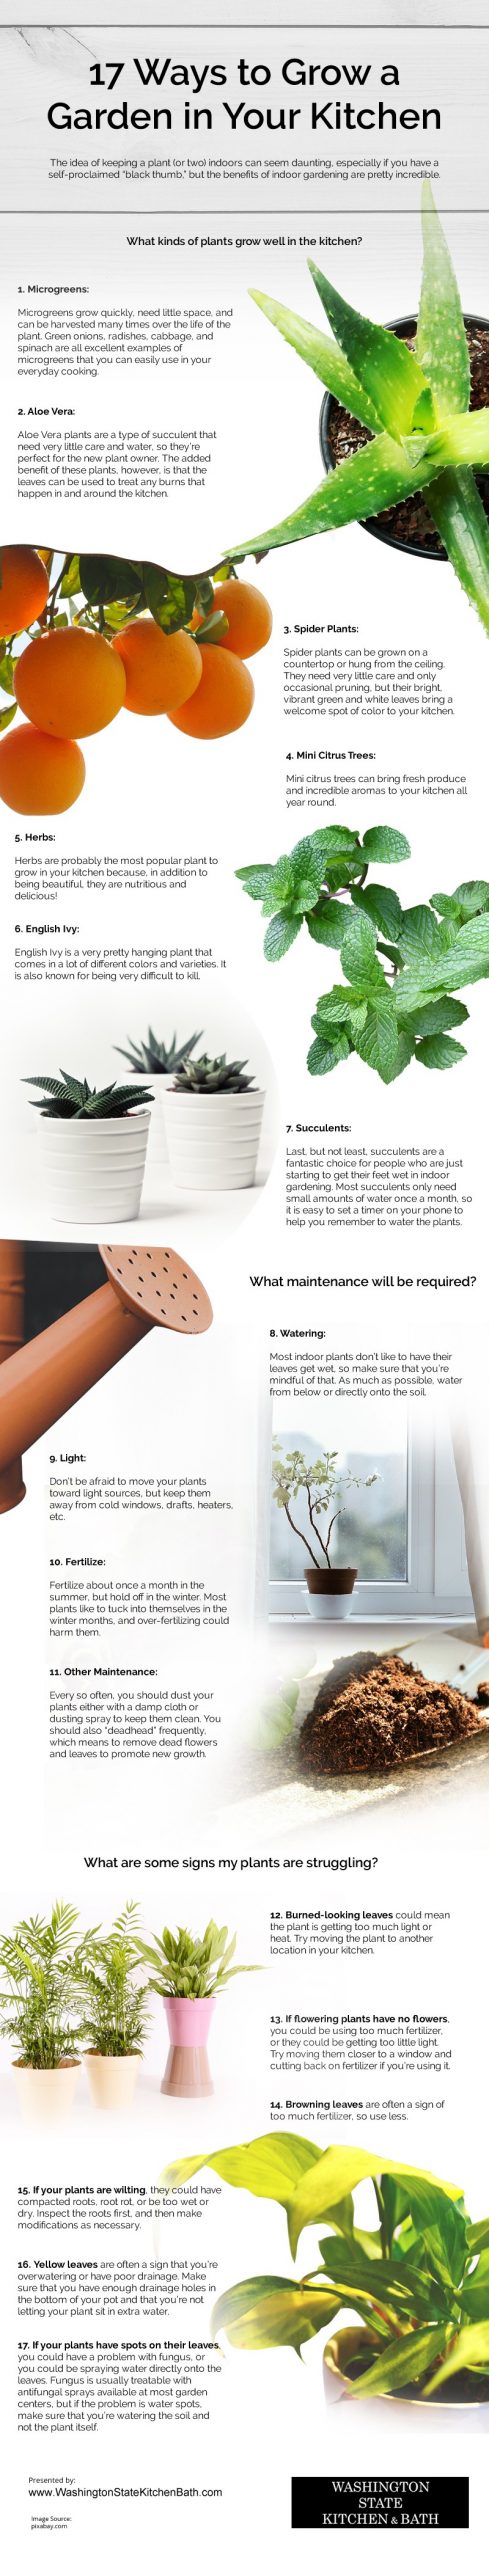 17 Ways to Grow a Garden in Your Kitchen Infographic